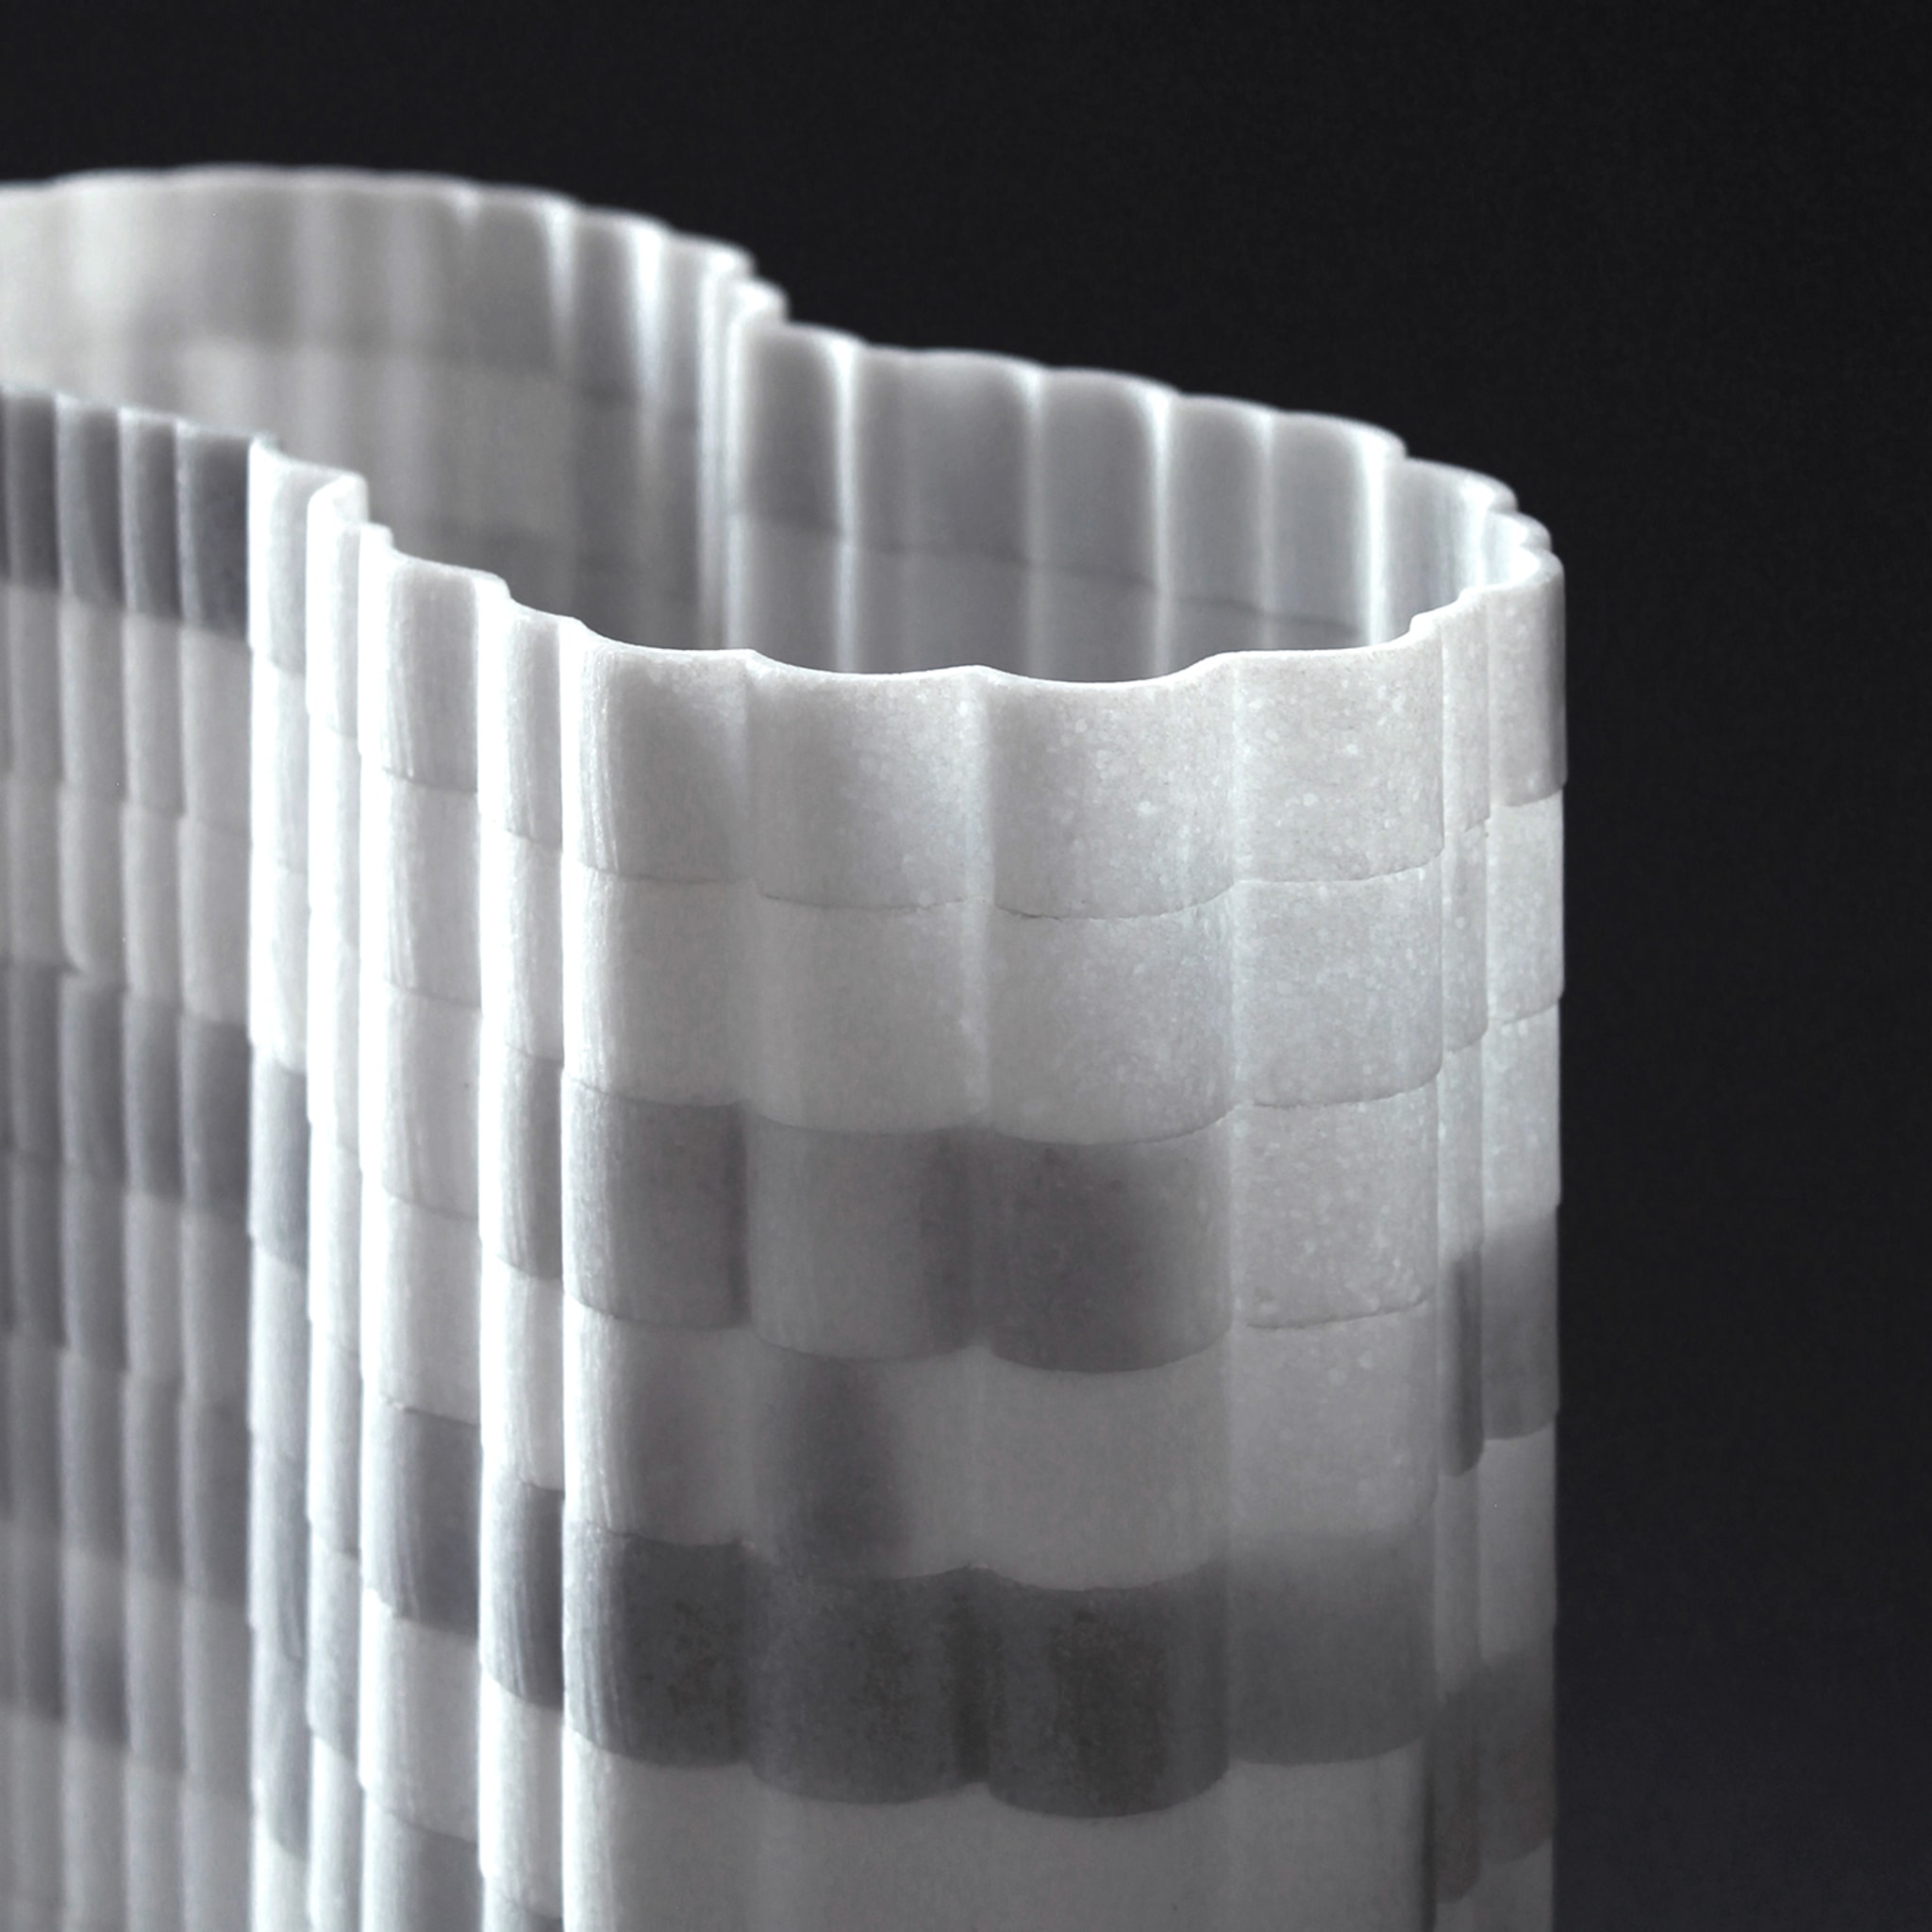 Stripes Vase Olimpic White Marble #2 by Paolo Ulian - Alternative view 2